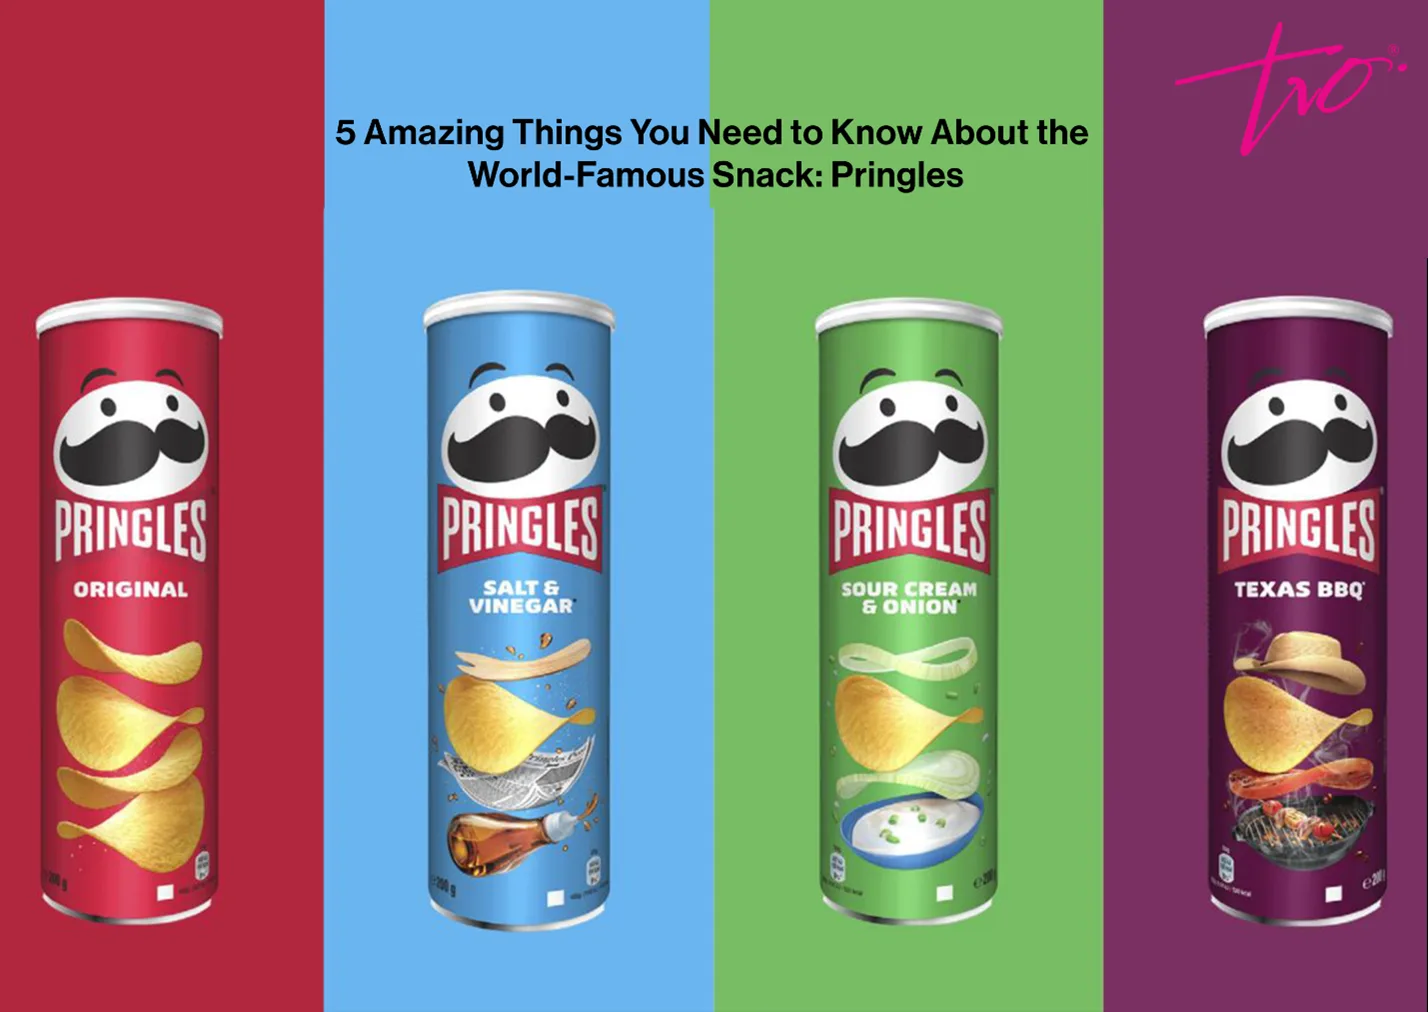 5 Amazing Things You Need to Know About the World-Famous Snack: Pringles